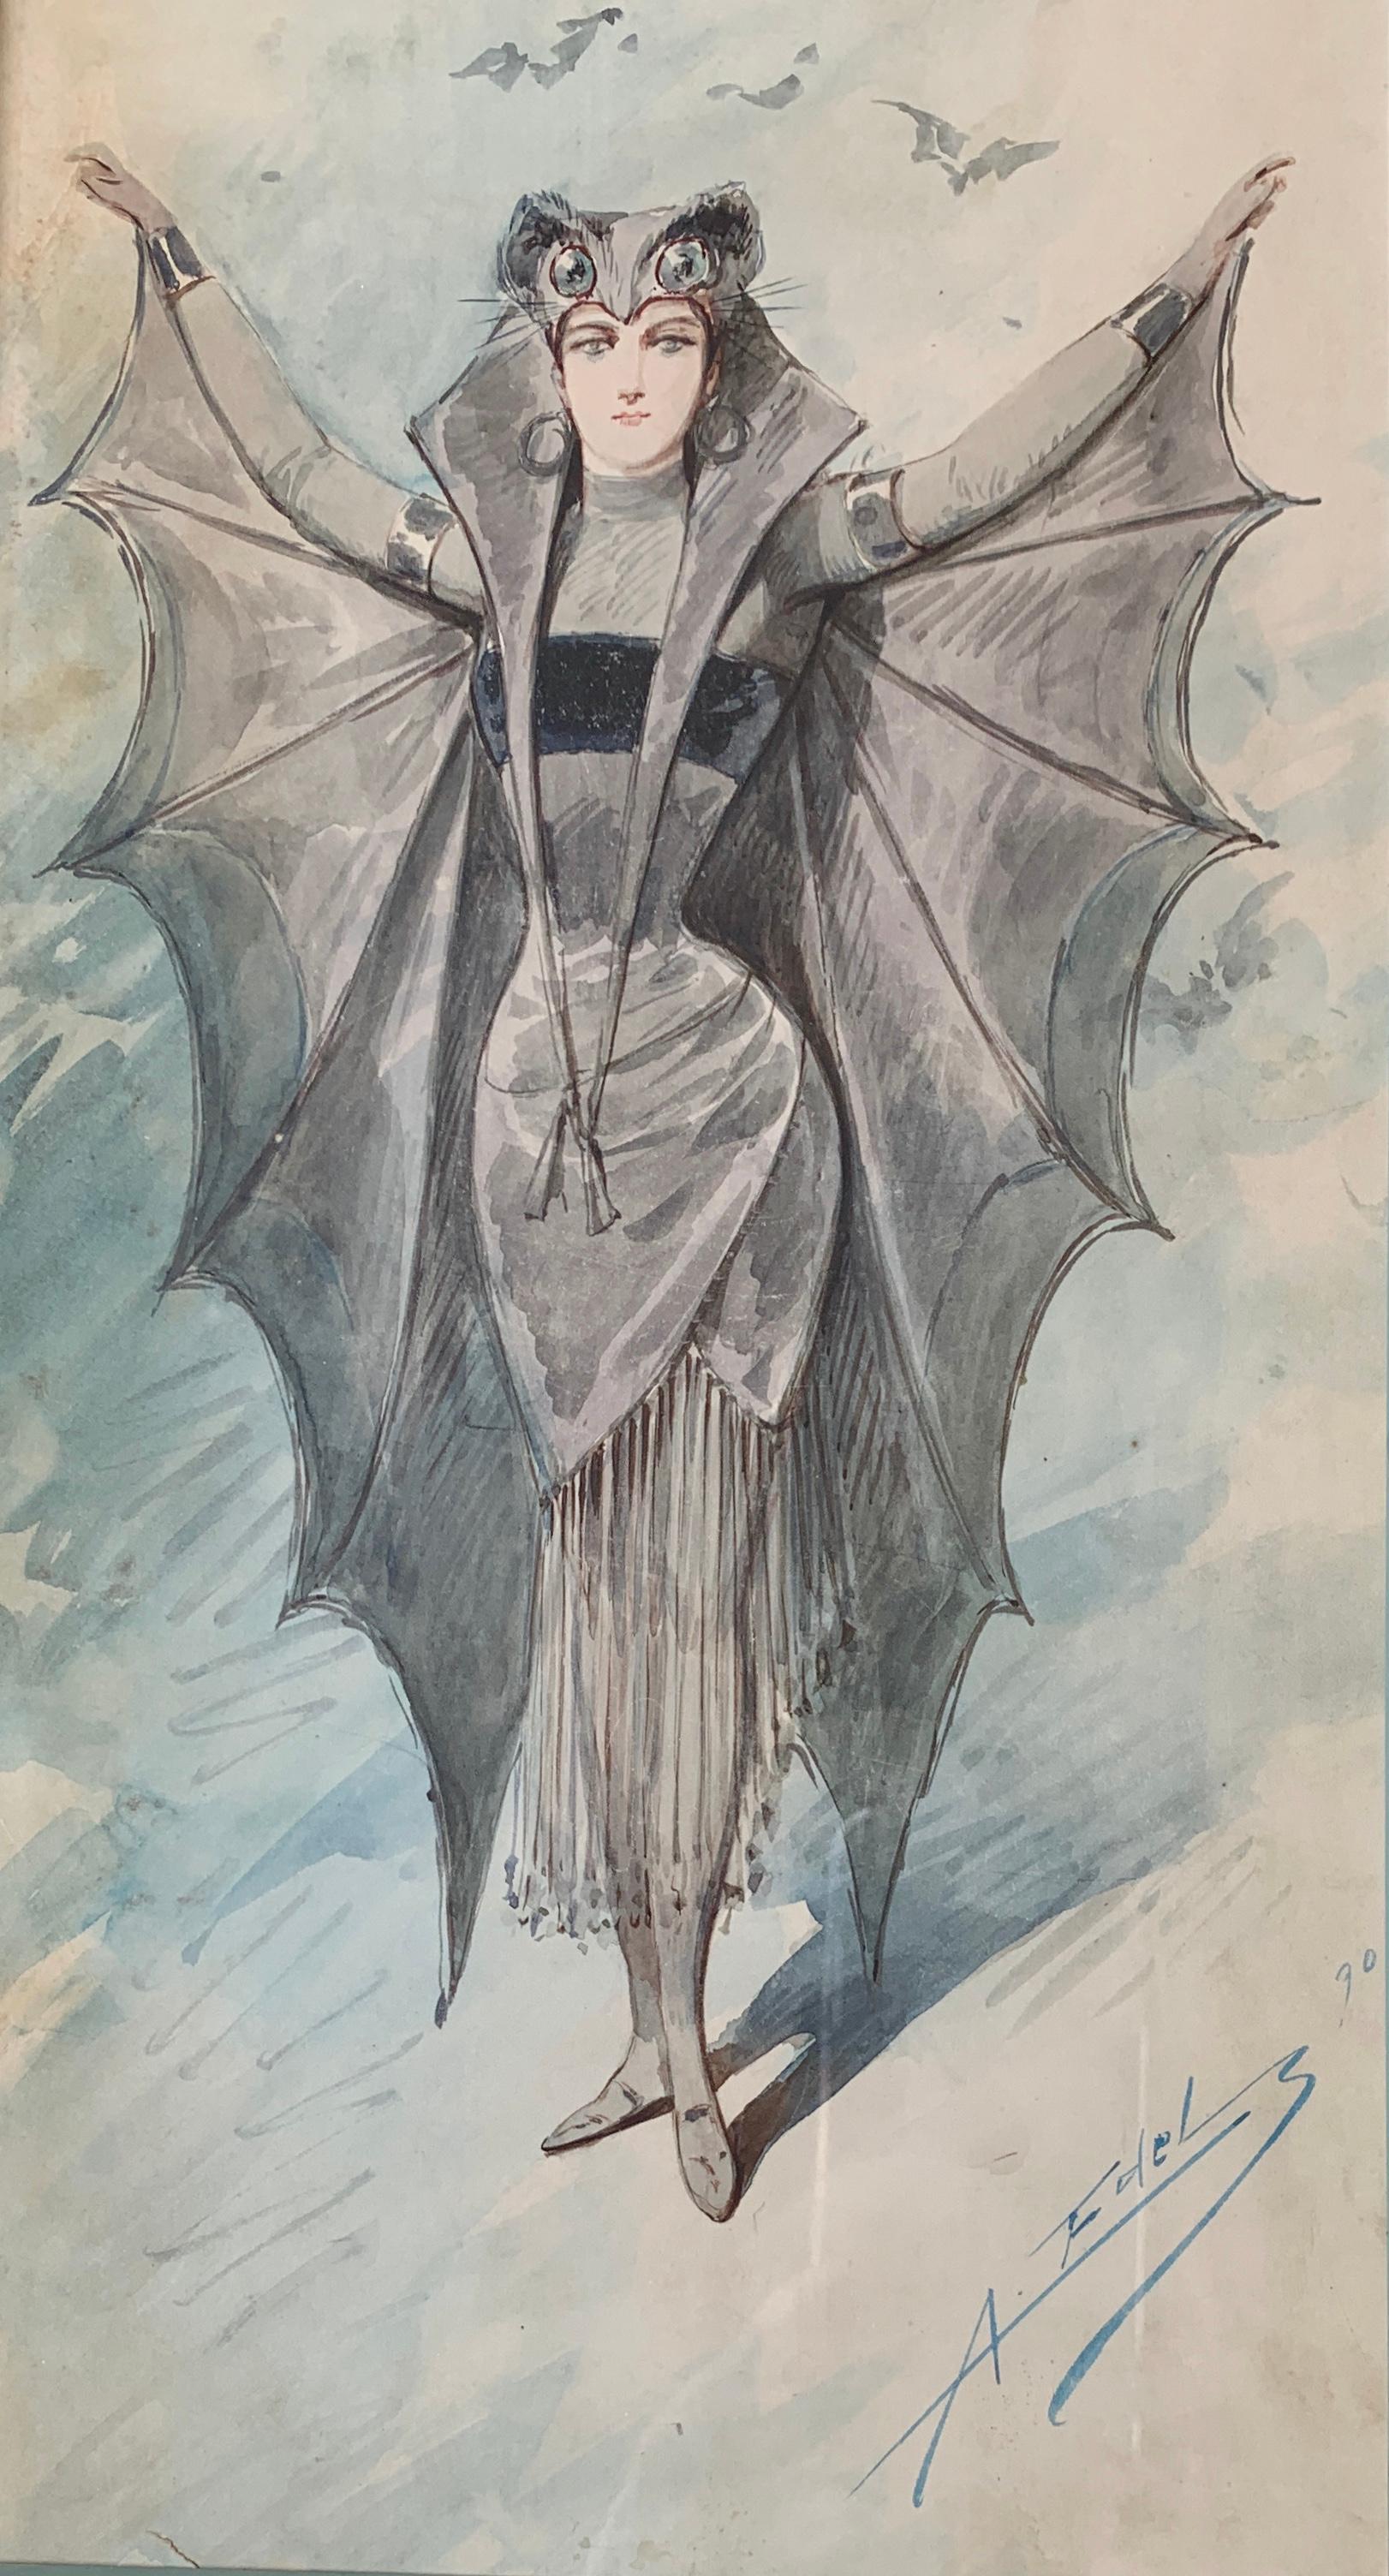 Fabulous antique original watercolor painting on paper from 1890 by famous deceased Italian painter and costume designer, Alfredo Edel Colorno (1856-1912) depicts a woman costumed with large, fantastical bat wings and a bat headdress, with her arms